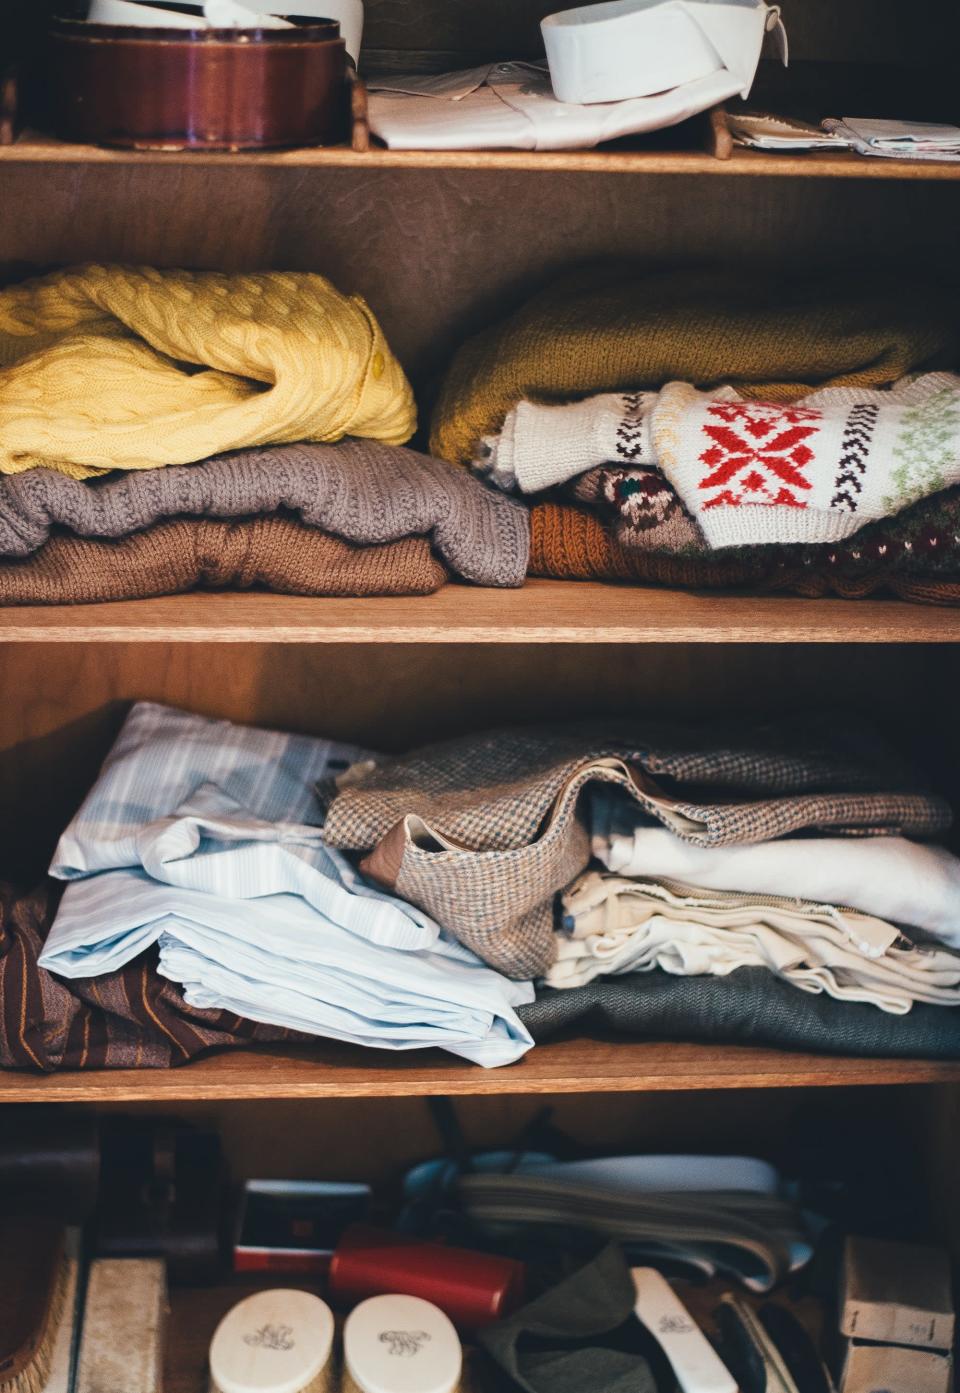 <p>Go through your closet and make a collection of clothes to donate. You'll feel better knowing your clothes will go to someone in need. And there is something about opening the door to a clean closet that makes you feel super accomplished.</p>